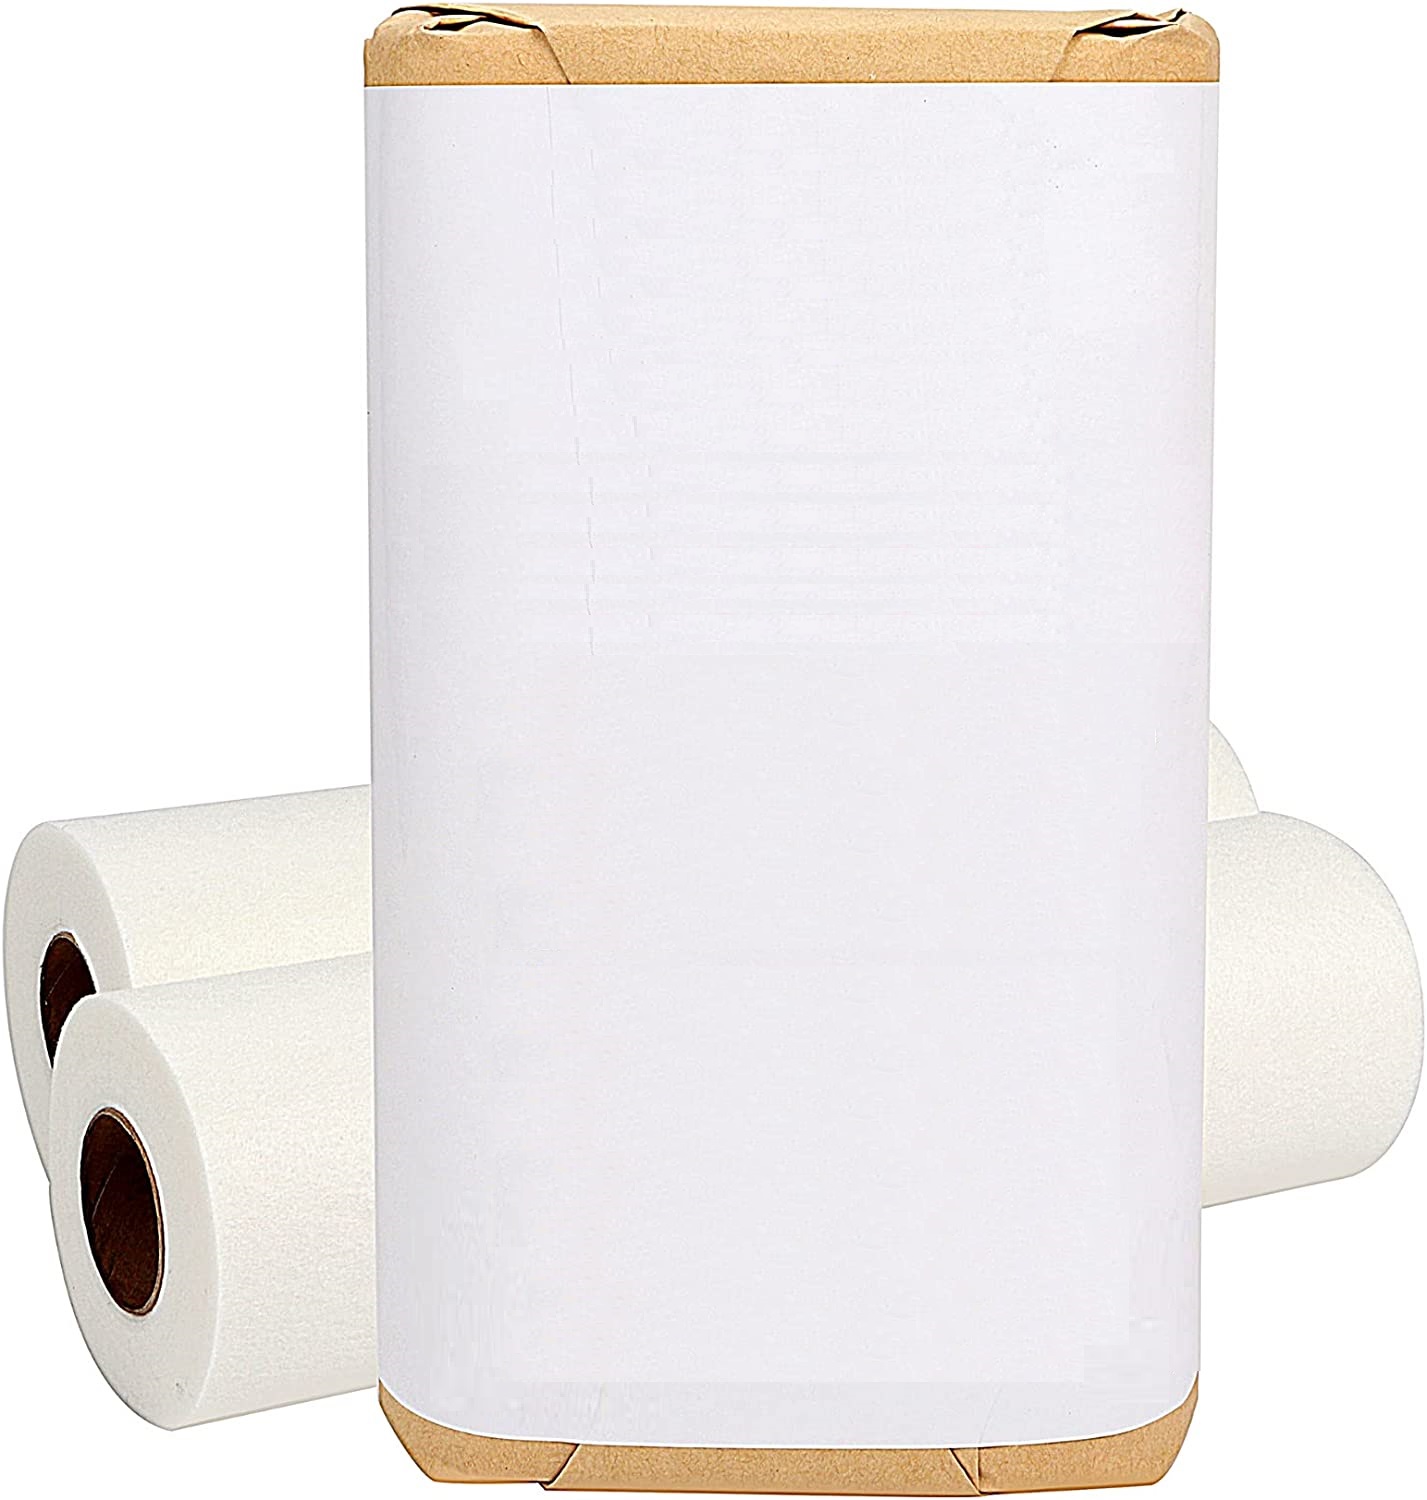 Bamboo Fiber Cleaning Rags